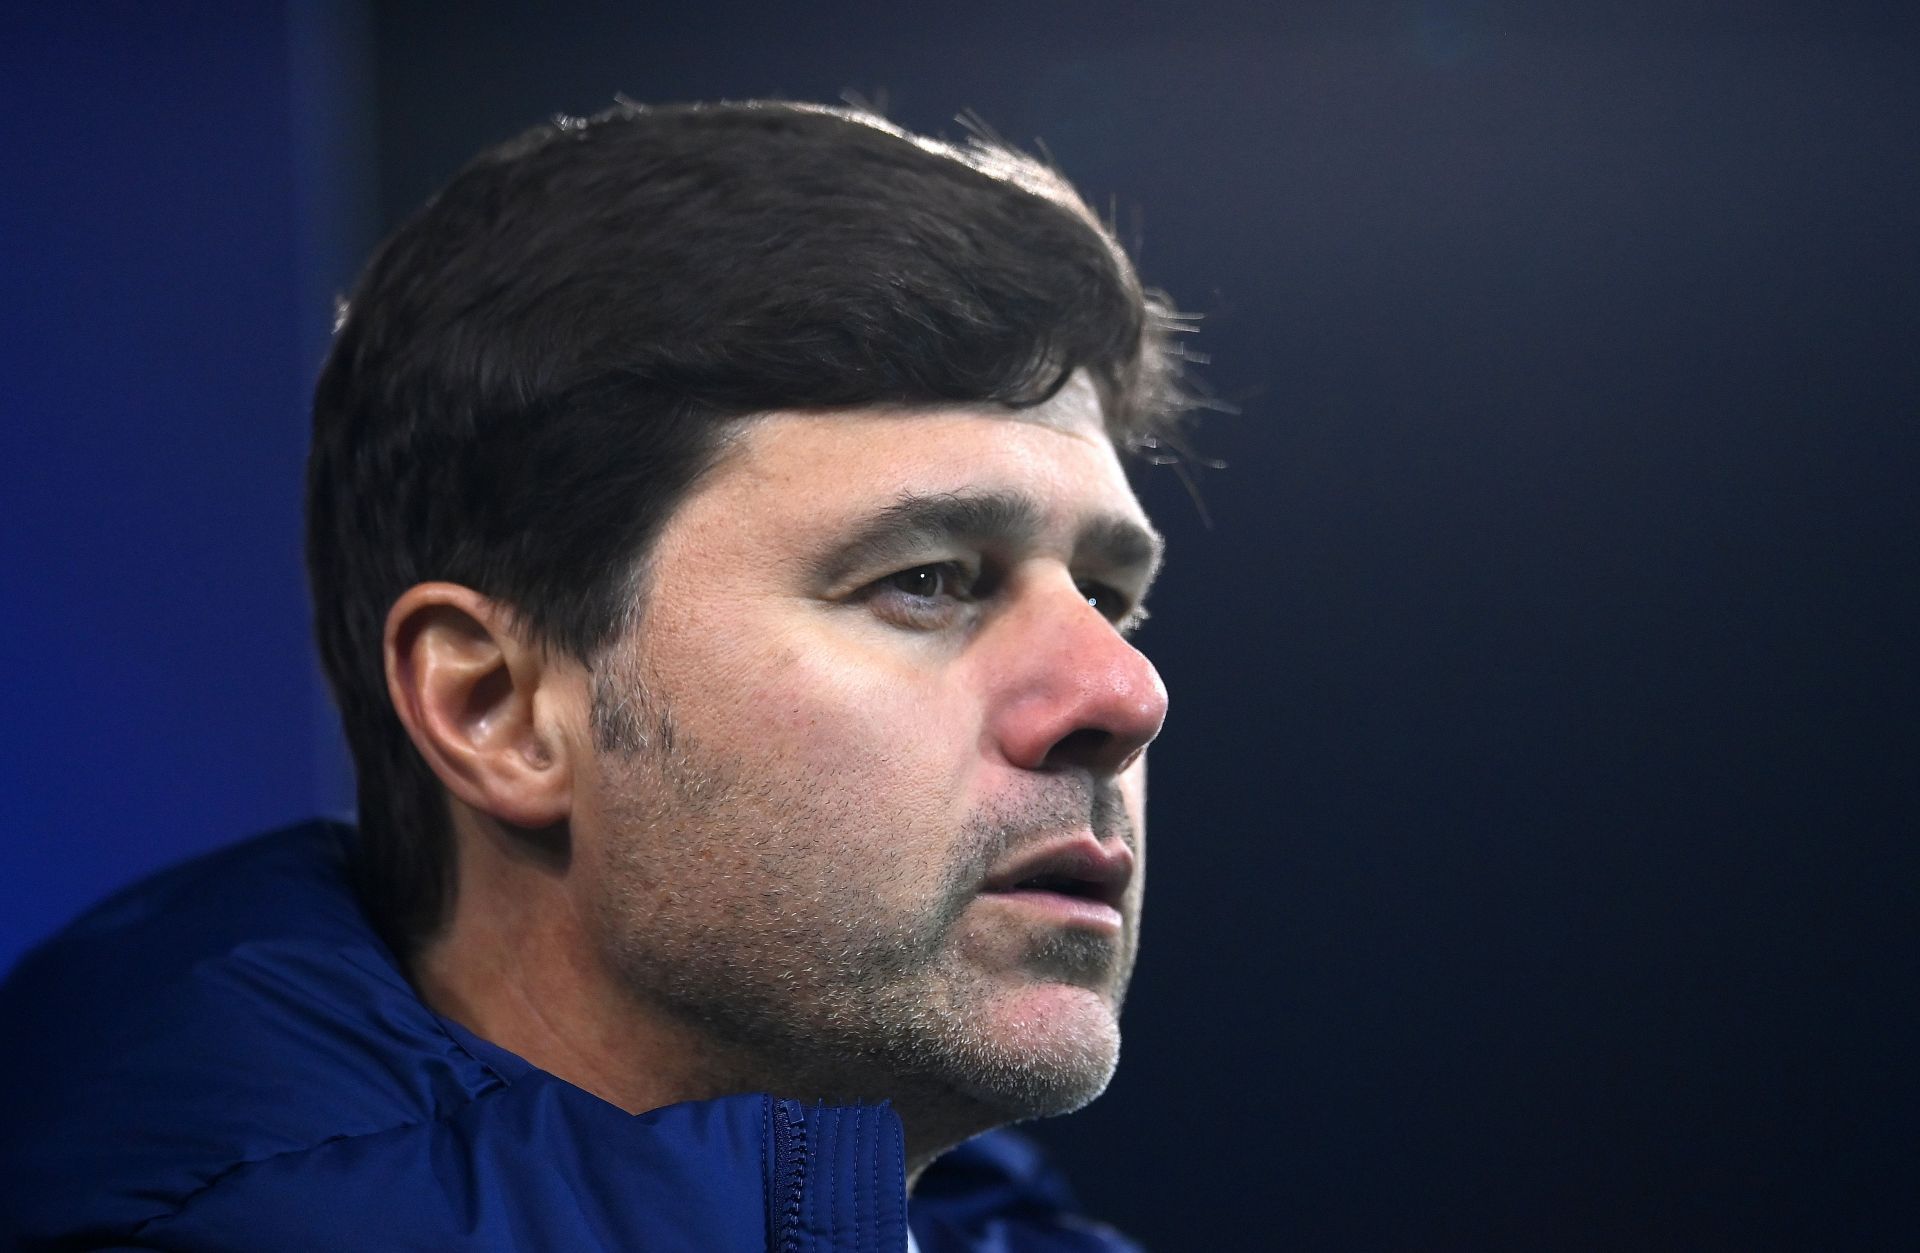 The Toffees may consider former Spurs manager Pochettino.